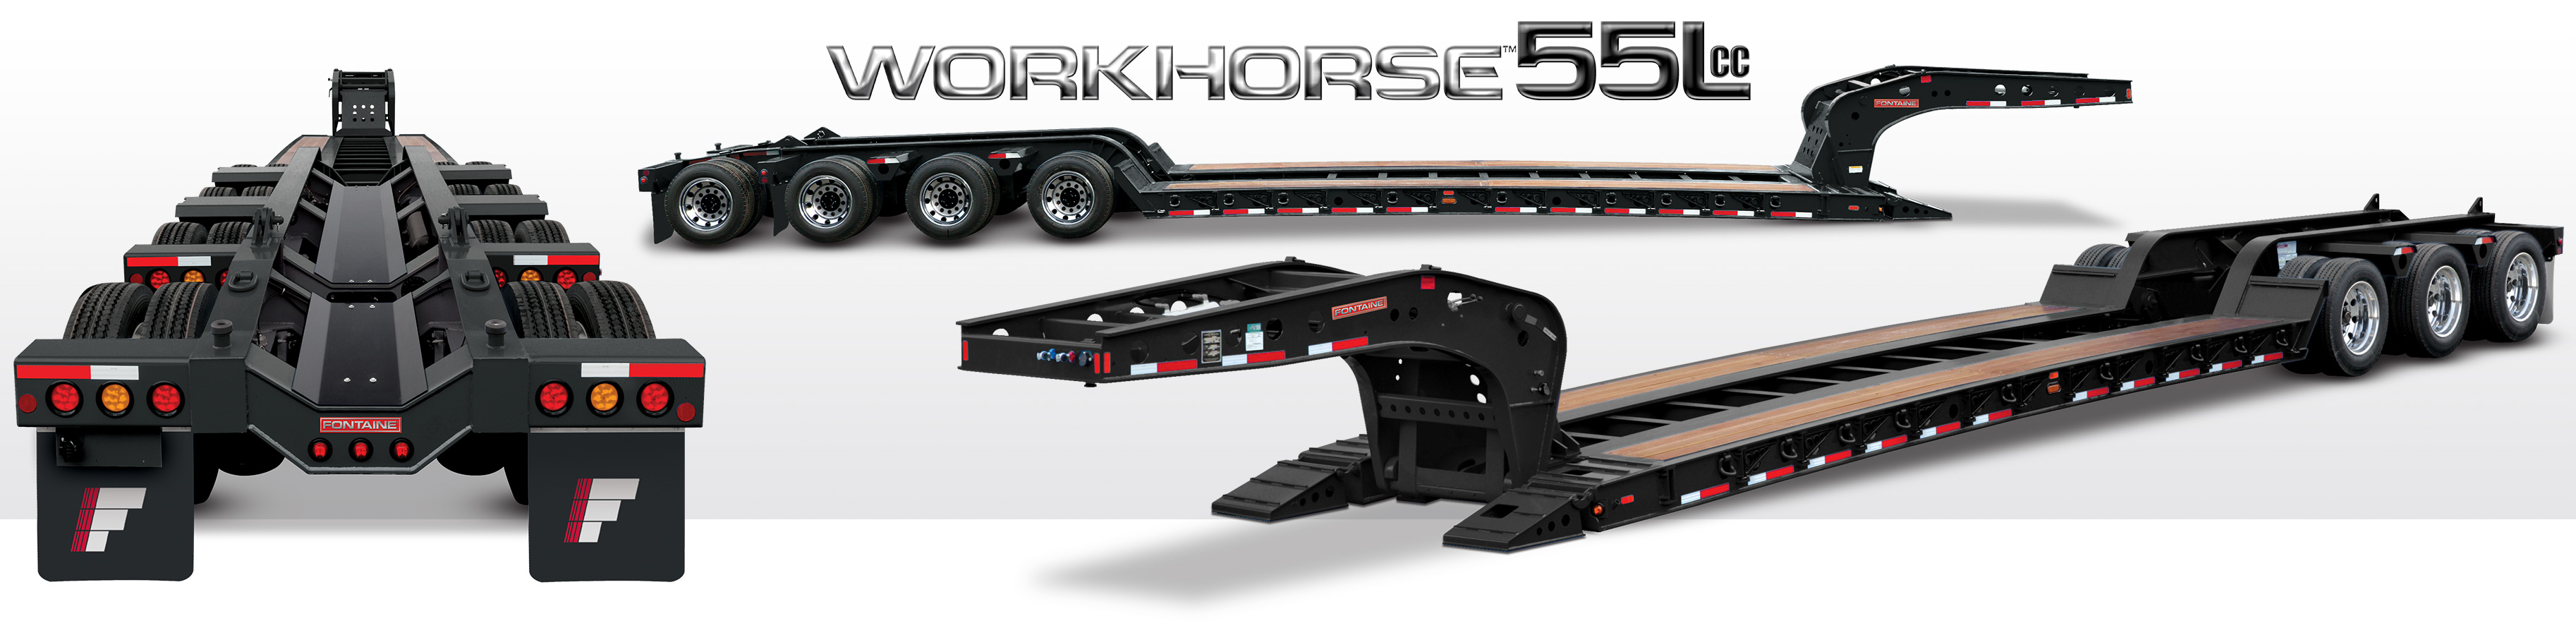 Workhorse 55l closed coupled lowbed trailer